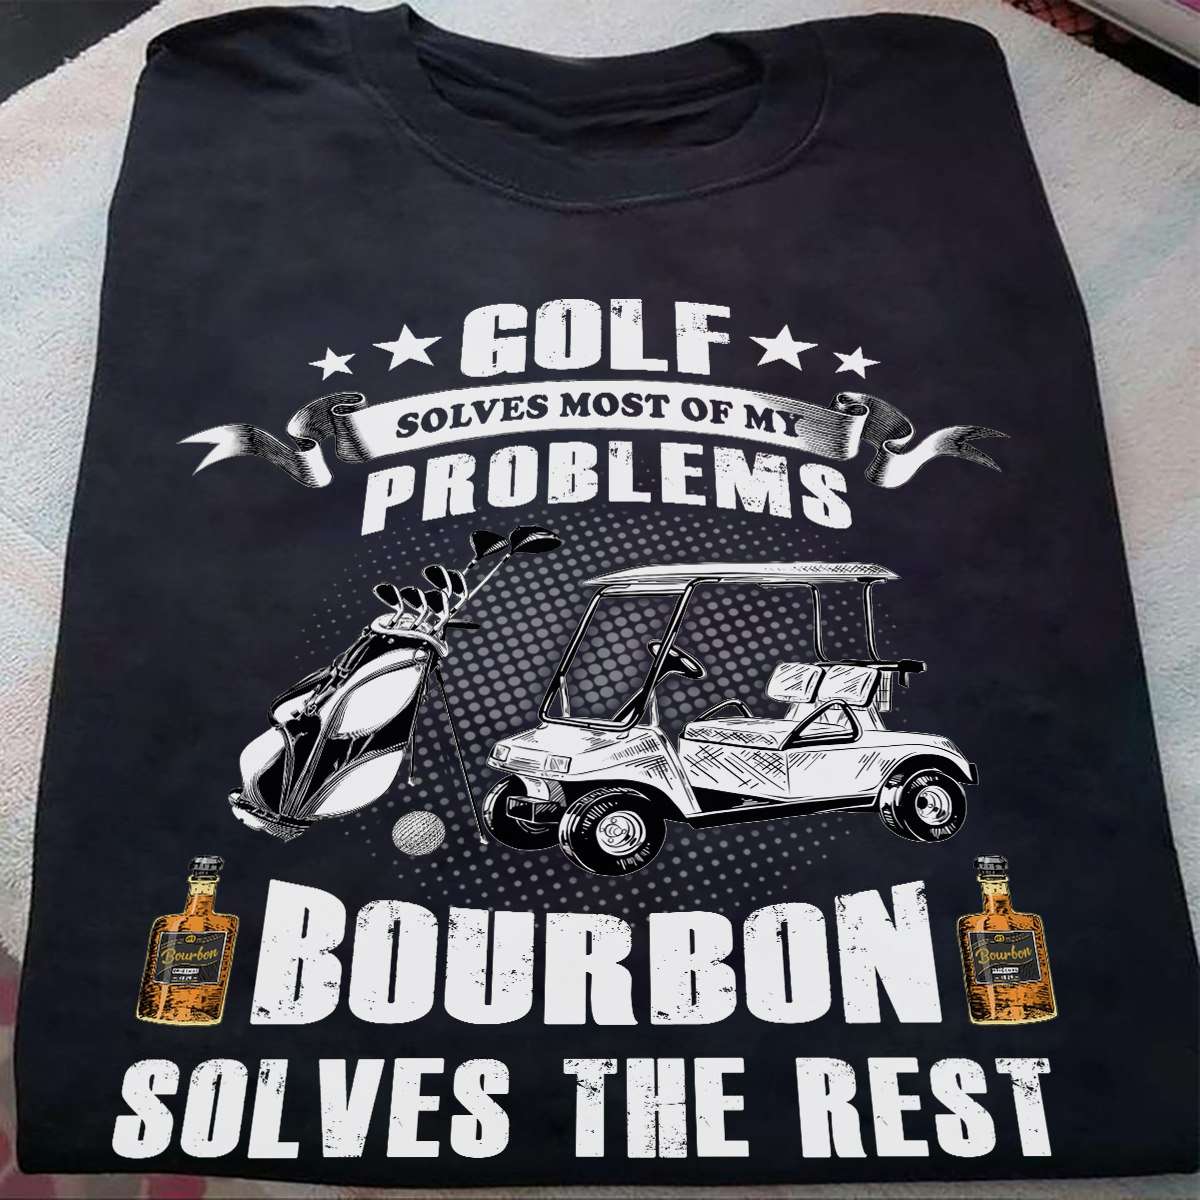 Golf solves most of my problems, bourbon solves the rest - Golf and bourbon